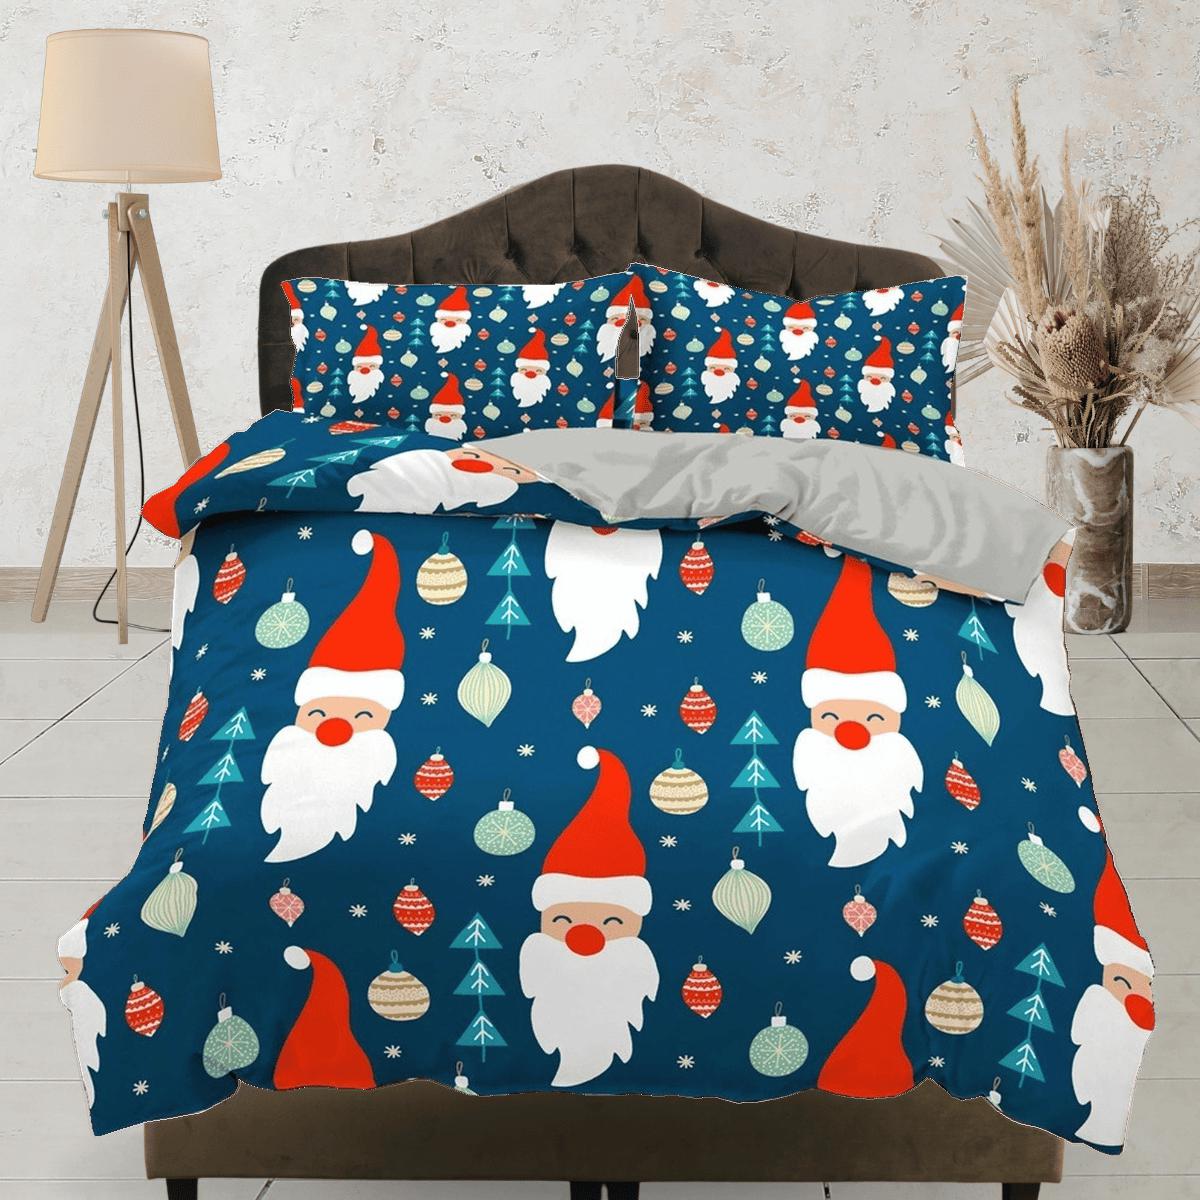 daintyduvet Cute Santa Claus pattern Christmas bedding & pillowcase holiday gift duvet cover king queen full twin toddler bedding baby Christmas decor